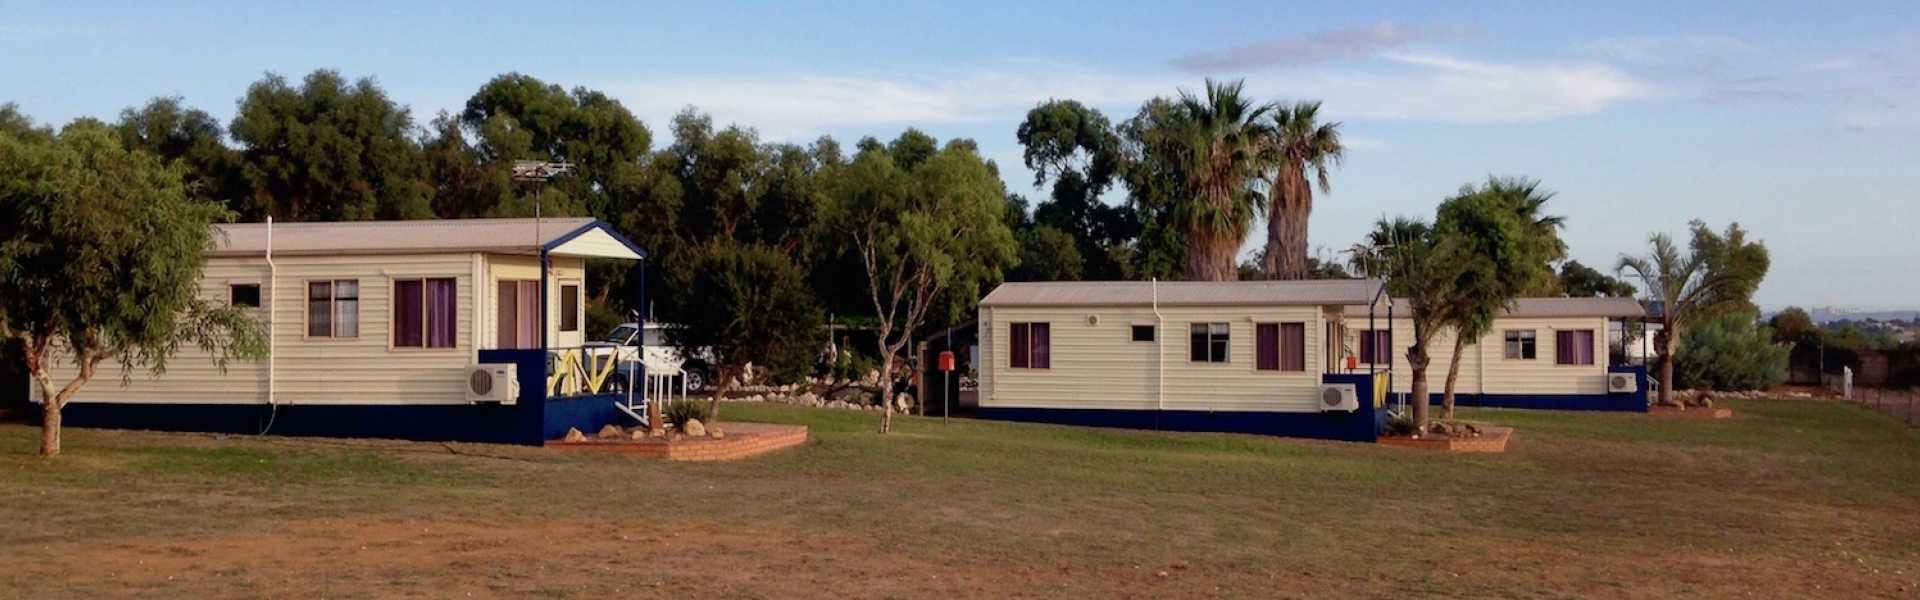 Kui Parks, Geraldton, Drummond Cove Holiday Park, Cabins